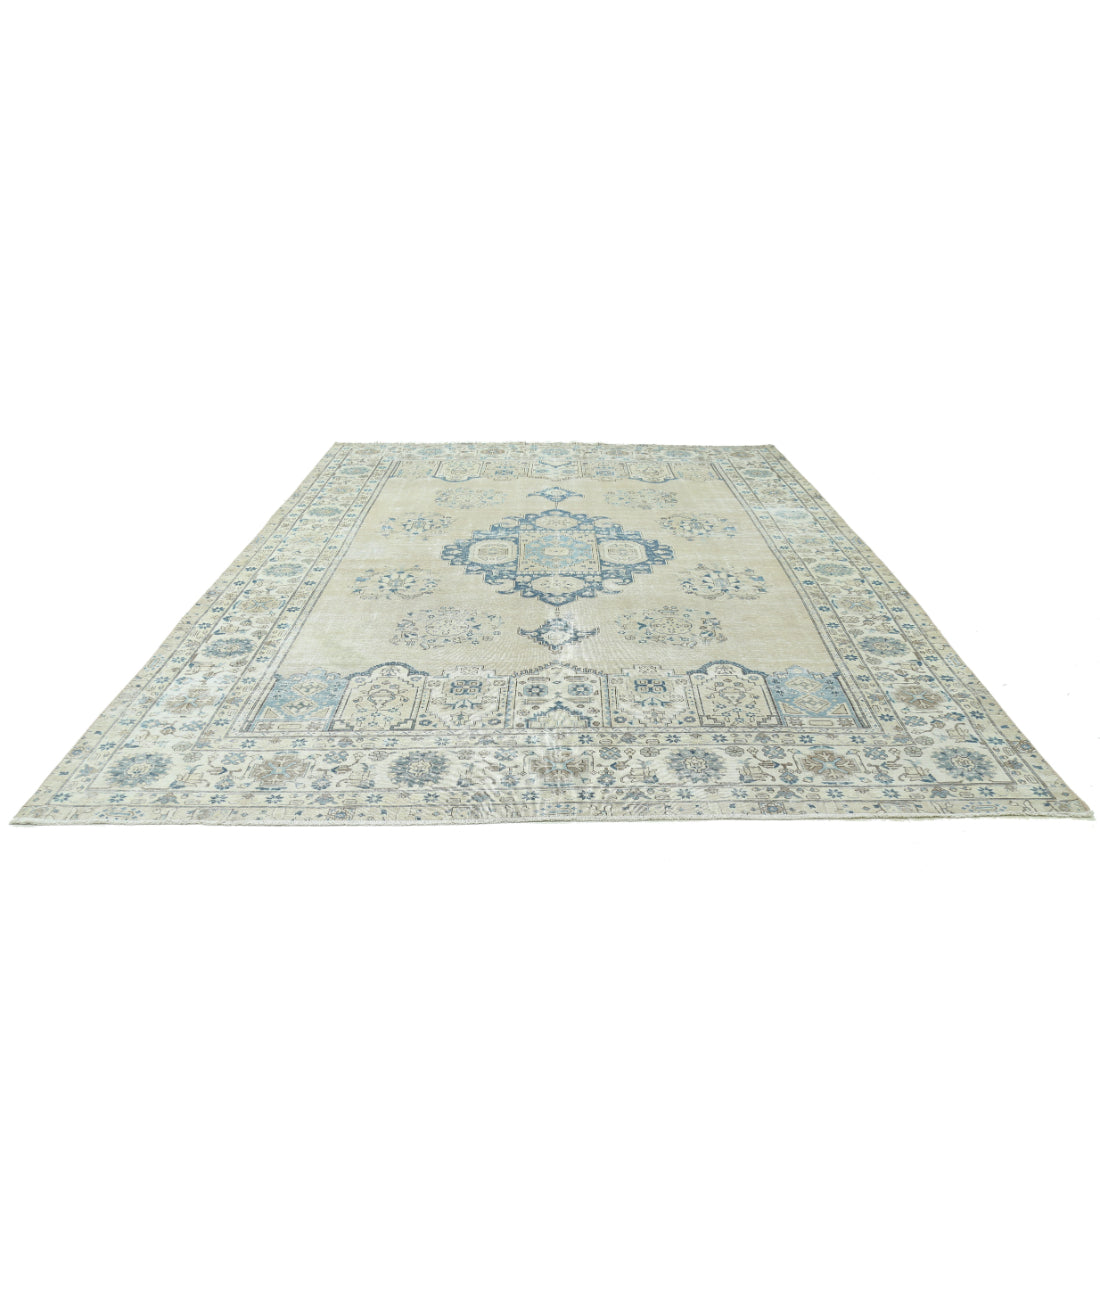 Hand Knotted Vintage Persian Tabriz Wool Rug - 9'8'' x 13'1'' 9'8'' x 13'1'' (290 X 393) / Taupe / Ivory